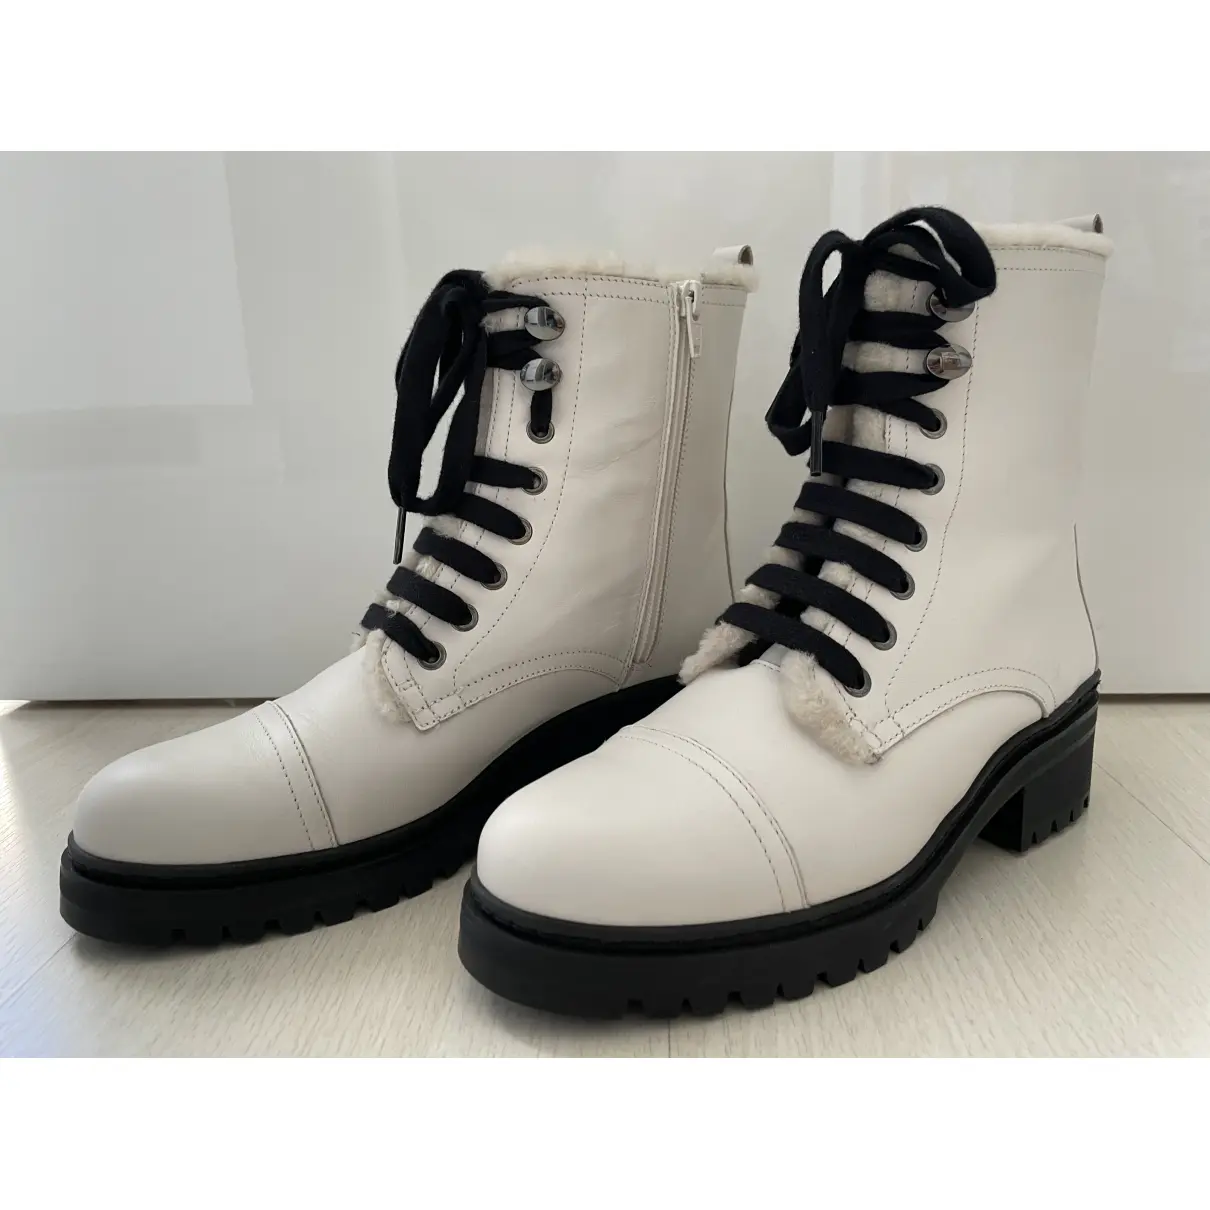 Buy Unisa Leather ankle boots online